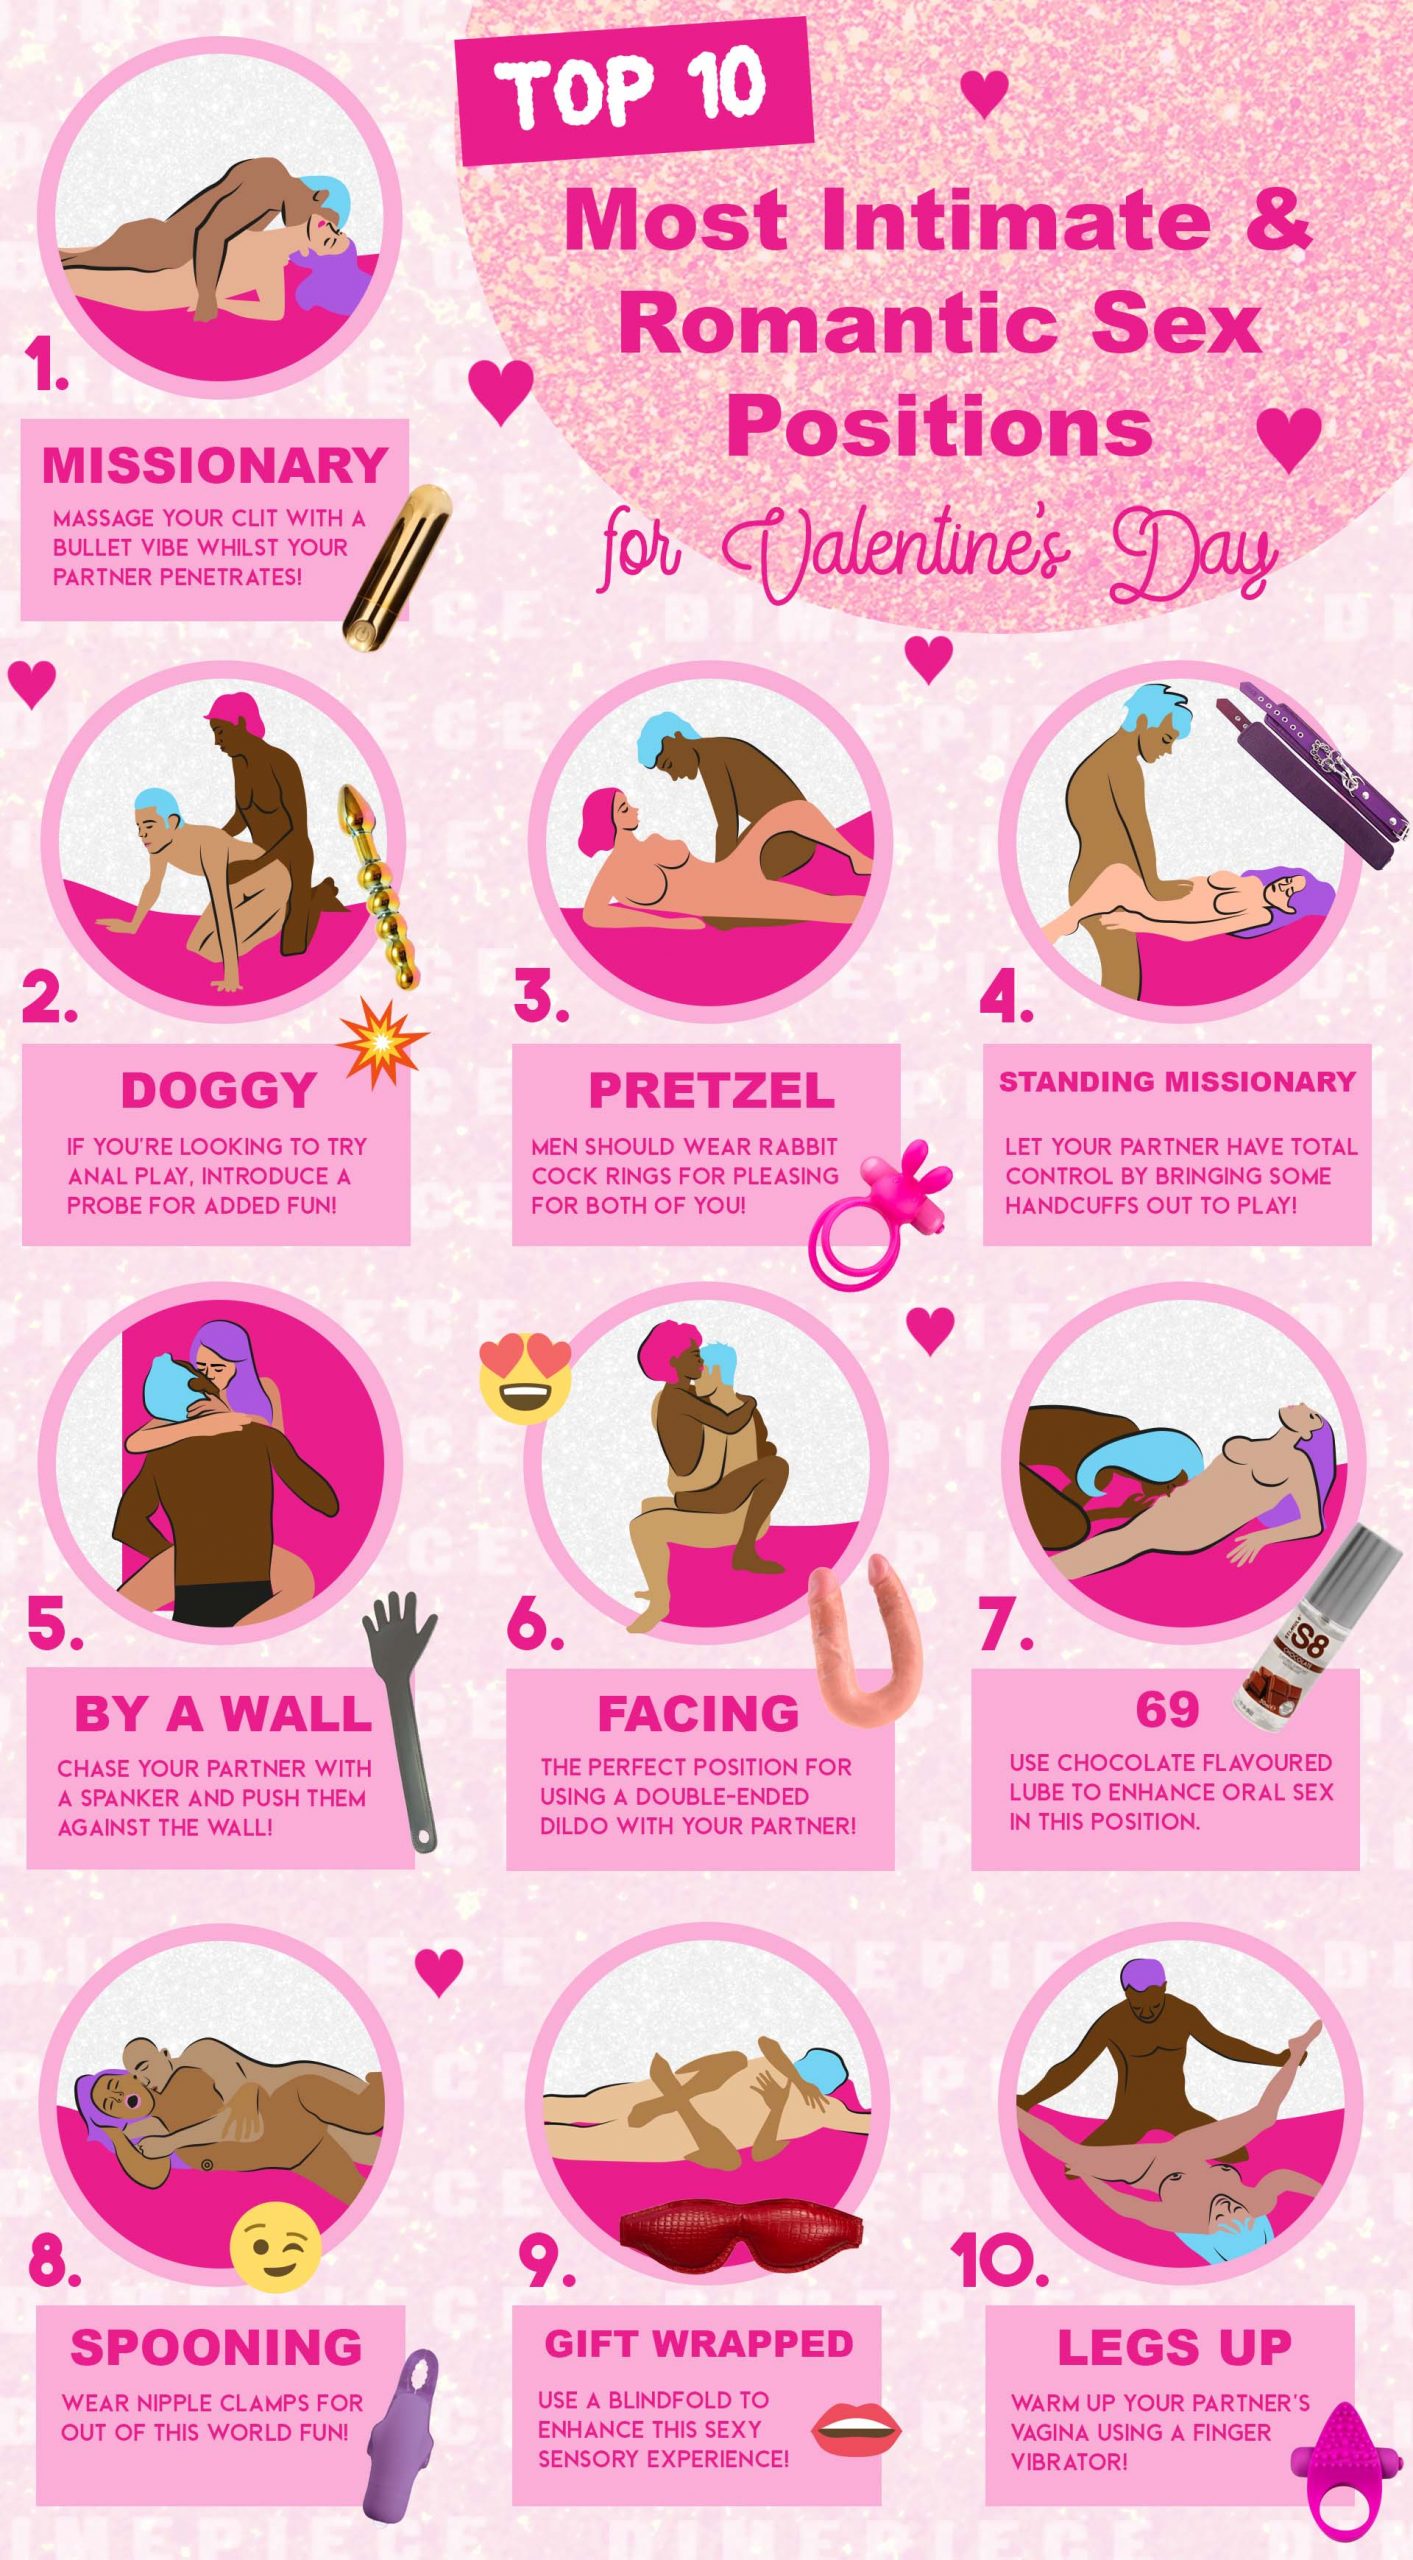 10 MOST INTIMATE AND ROMANTIC SEX POSITIONS FOR VALENTINE'S DAY